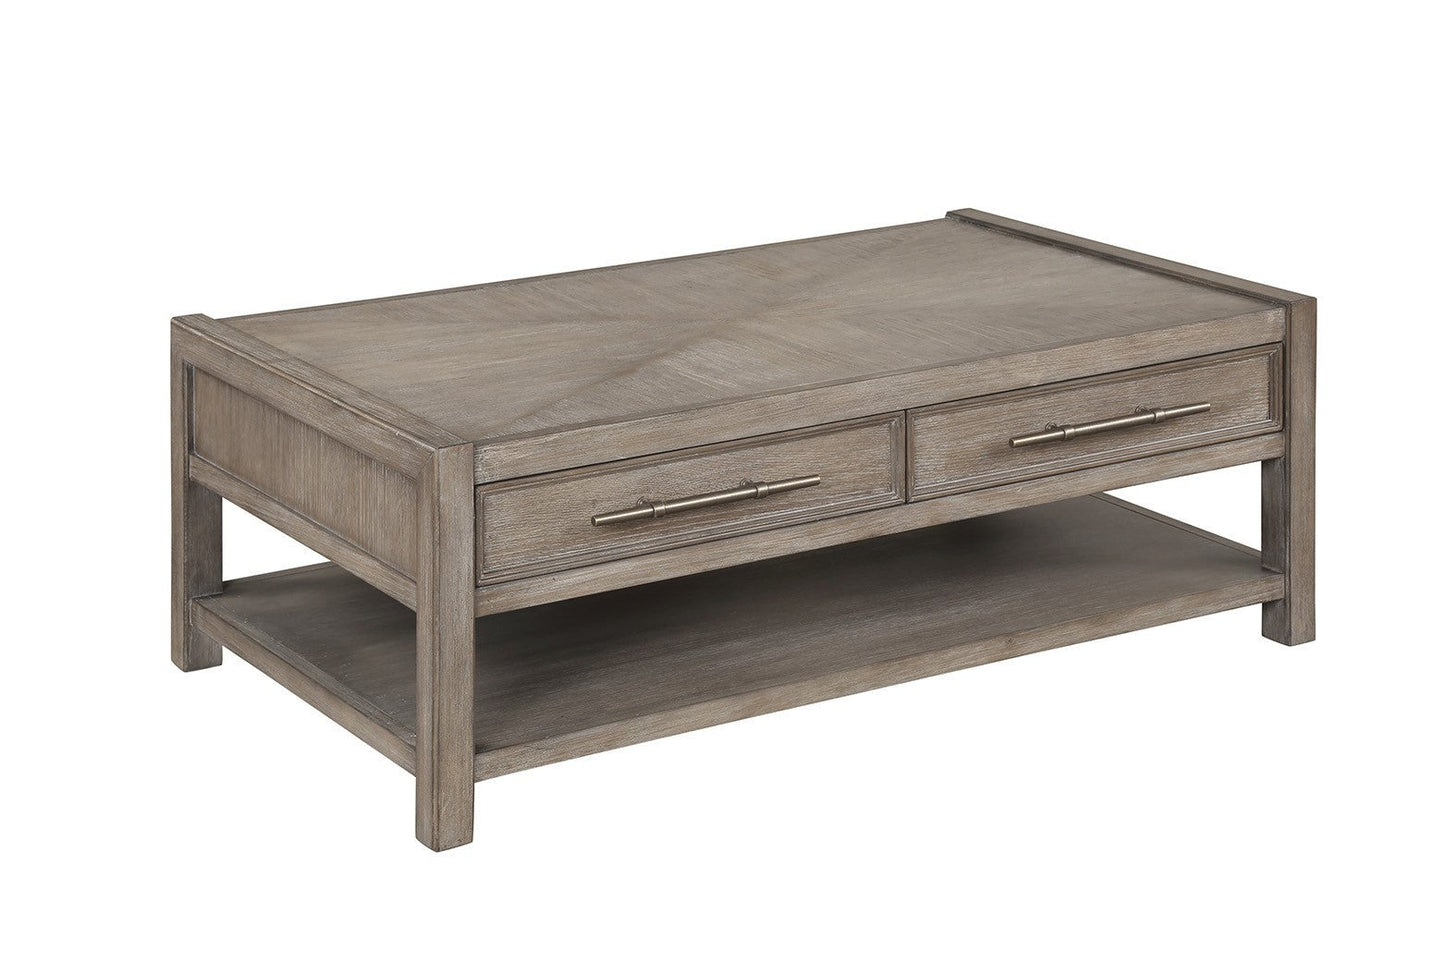 Bridgevine Home Cypress Lane 50 inch Coffee Table, No Assembly Required, White Oak Finish